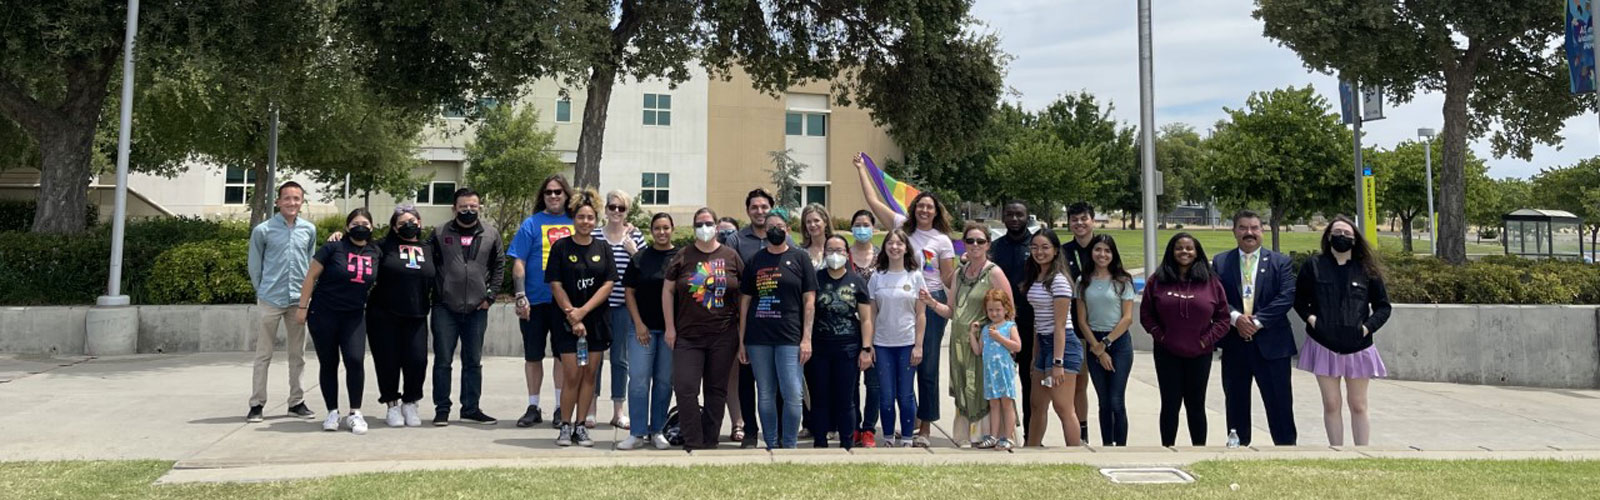 Students and Staff standing together in large group next to large pride flag and pole.